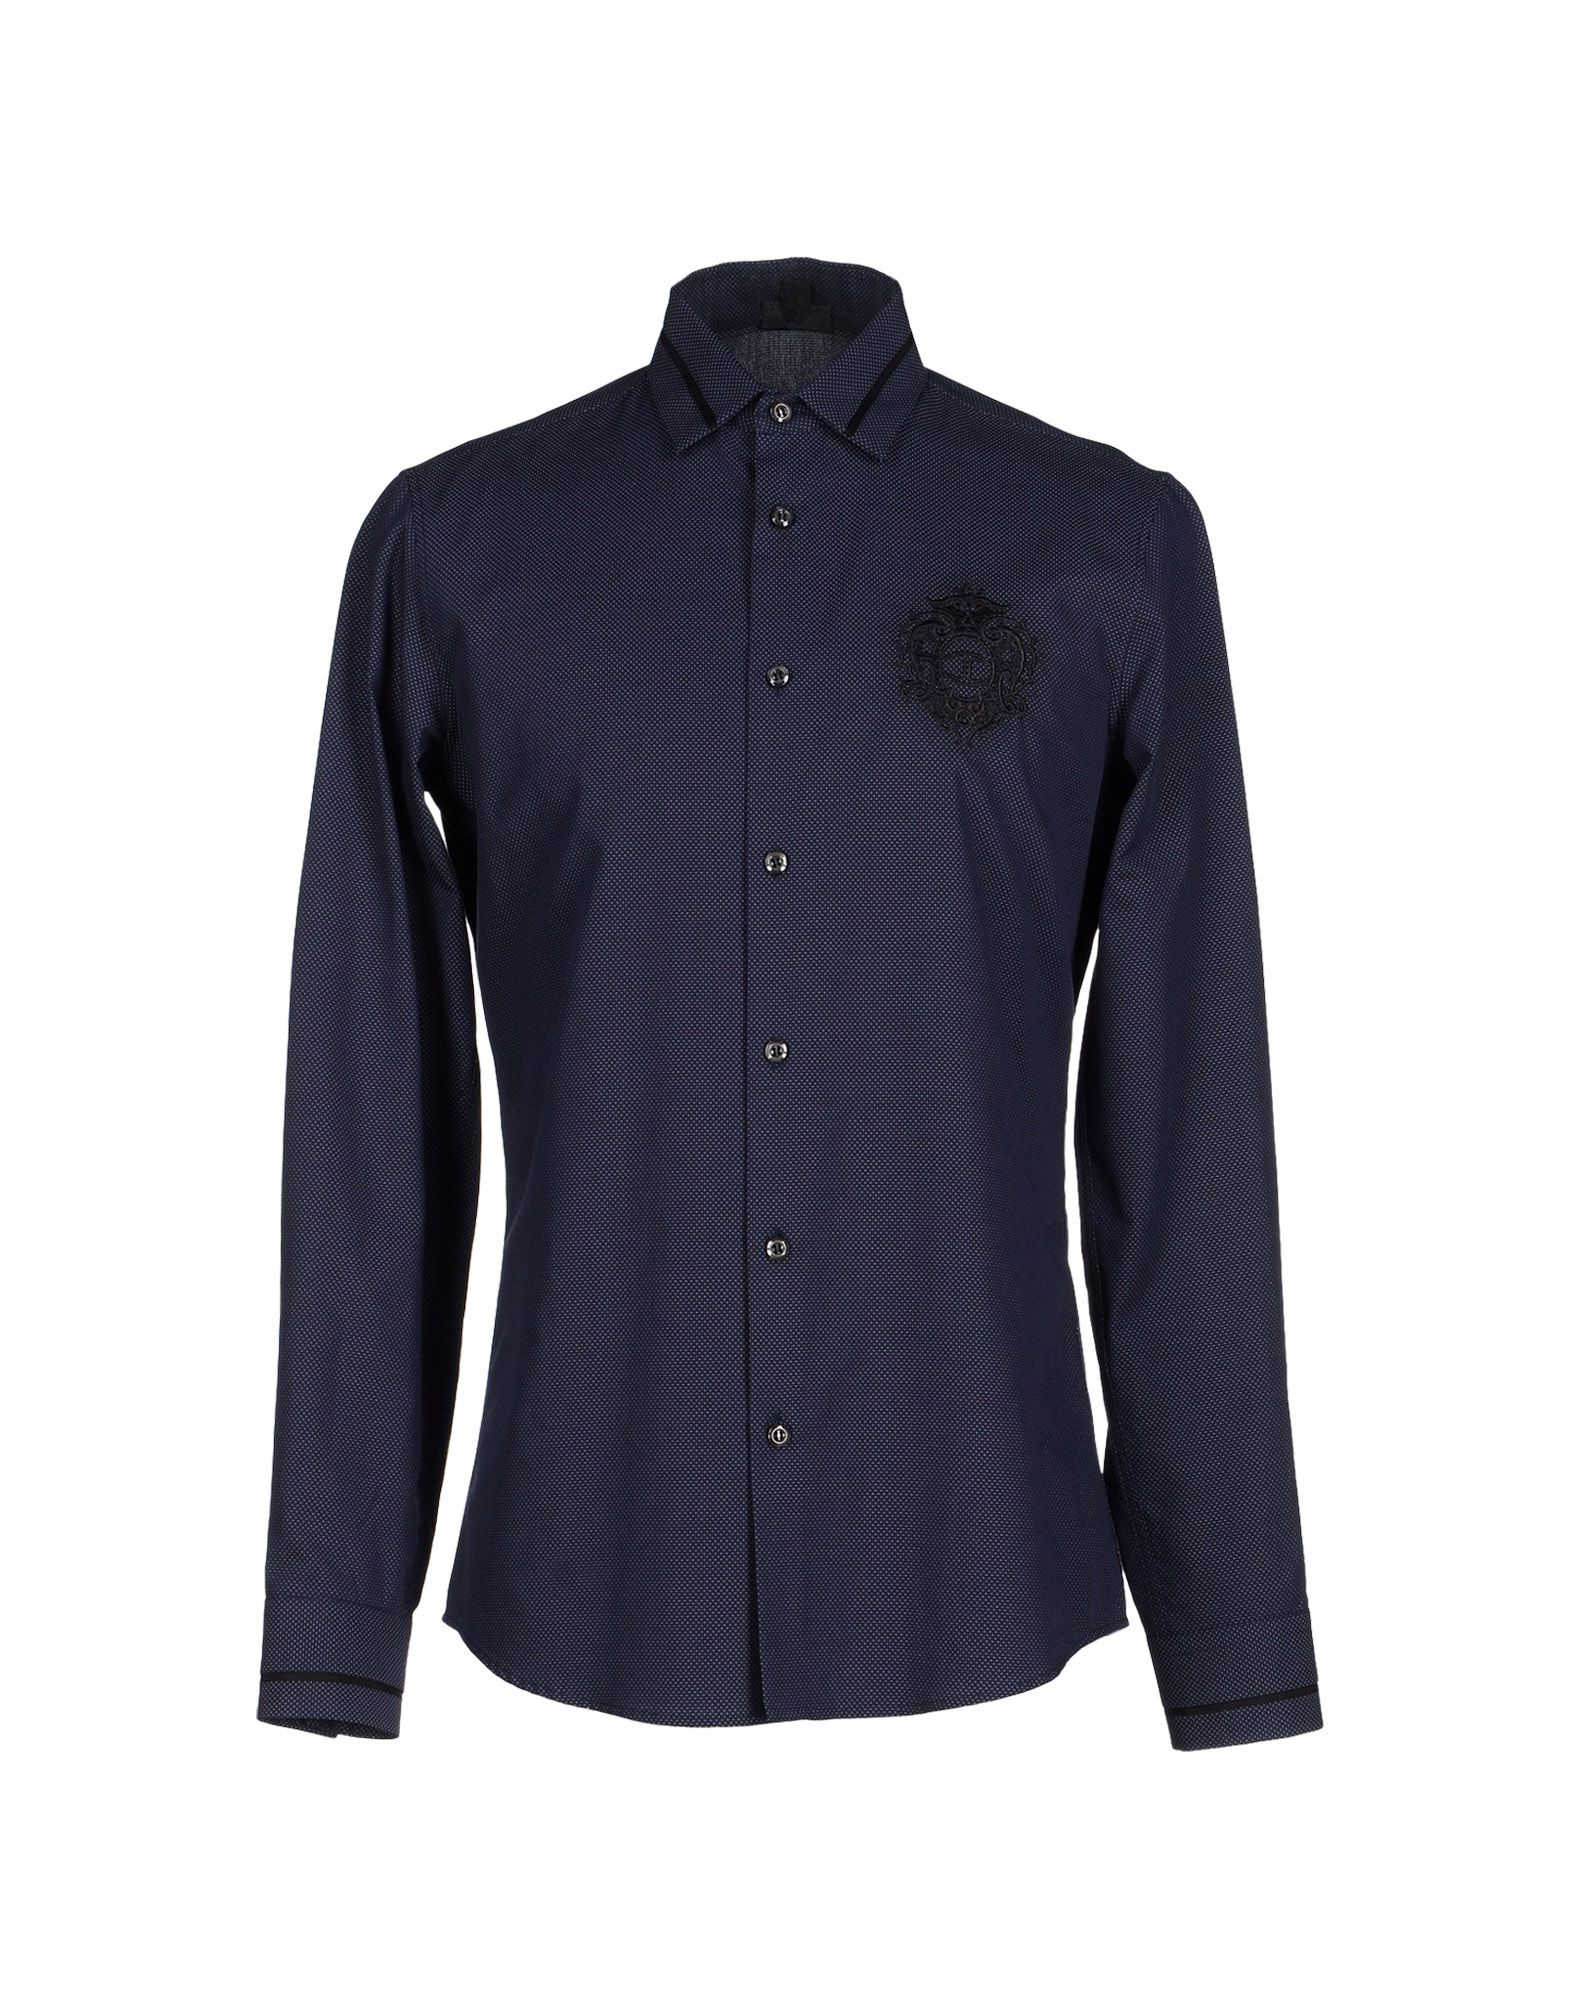 Lyst - Just Cavalli Shirt in Blue for Men